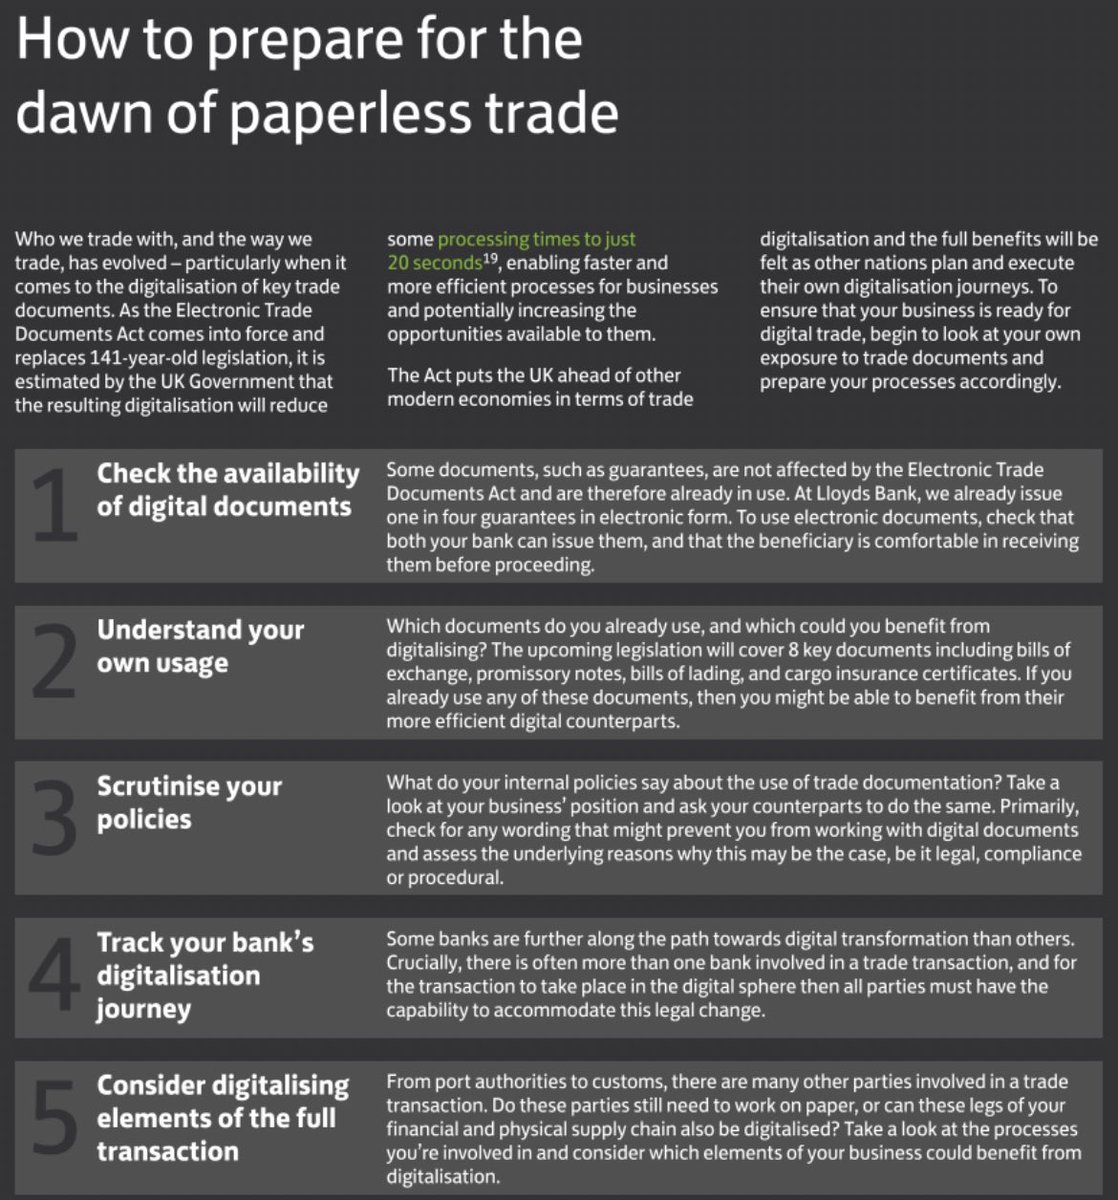 $XDC The Electronic Trade Documents Act #ETDA puts the UK ahead of other modern economies in terms of trade digitalisation and the full benefits will be felt as other nations plan and execute their own digitalisation journeys.

#PaperlessTrade #DigitalTrade #MLETR  #XDC…